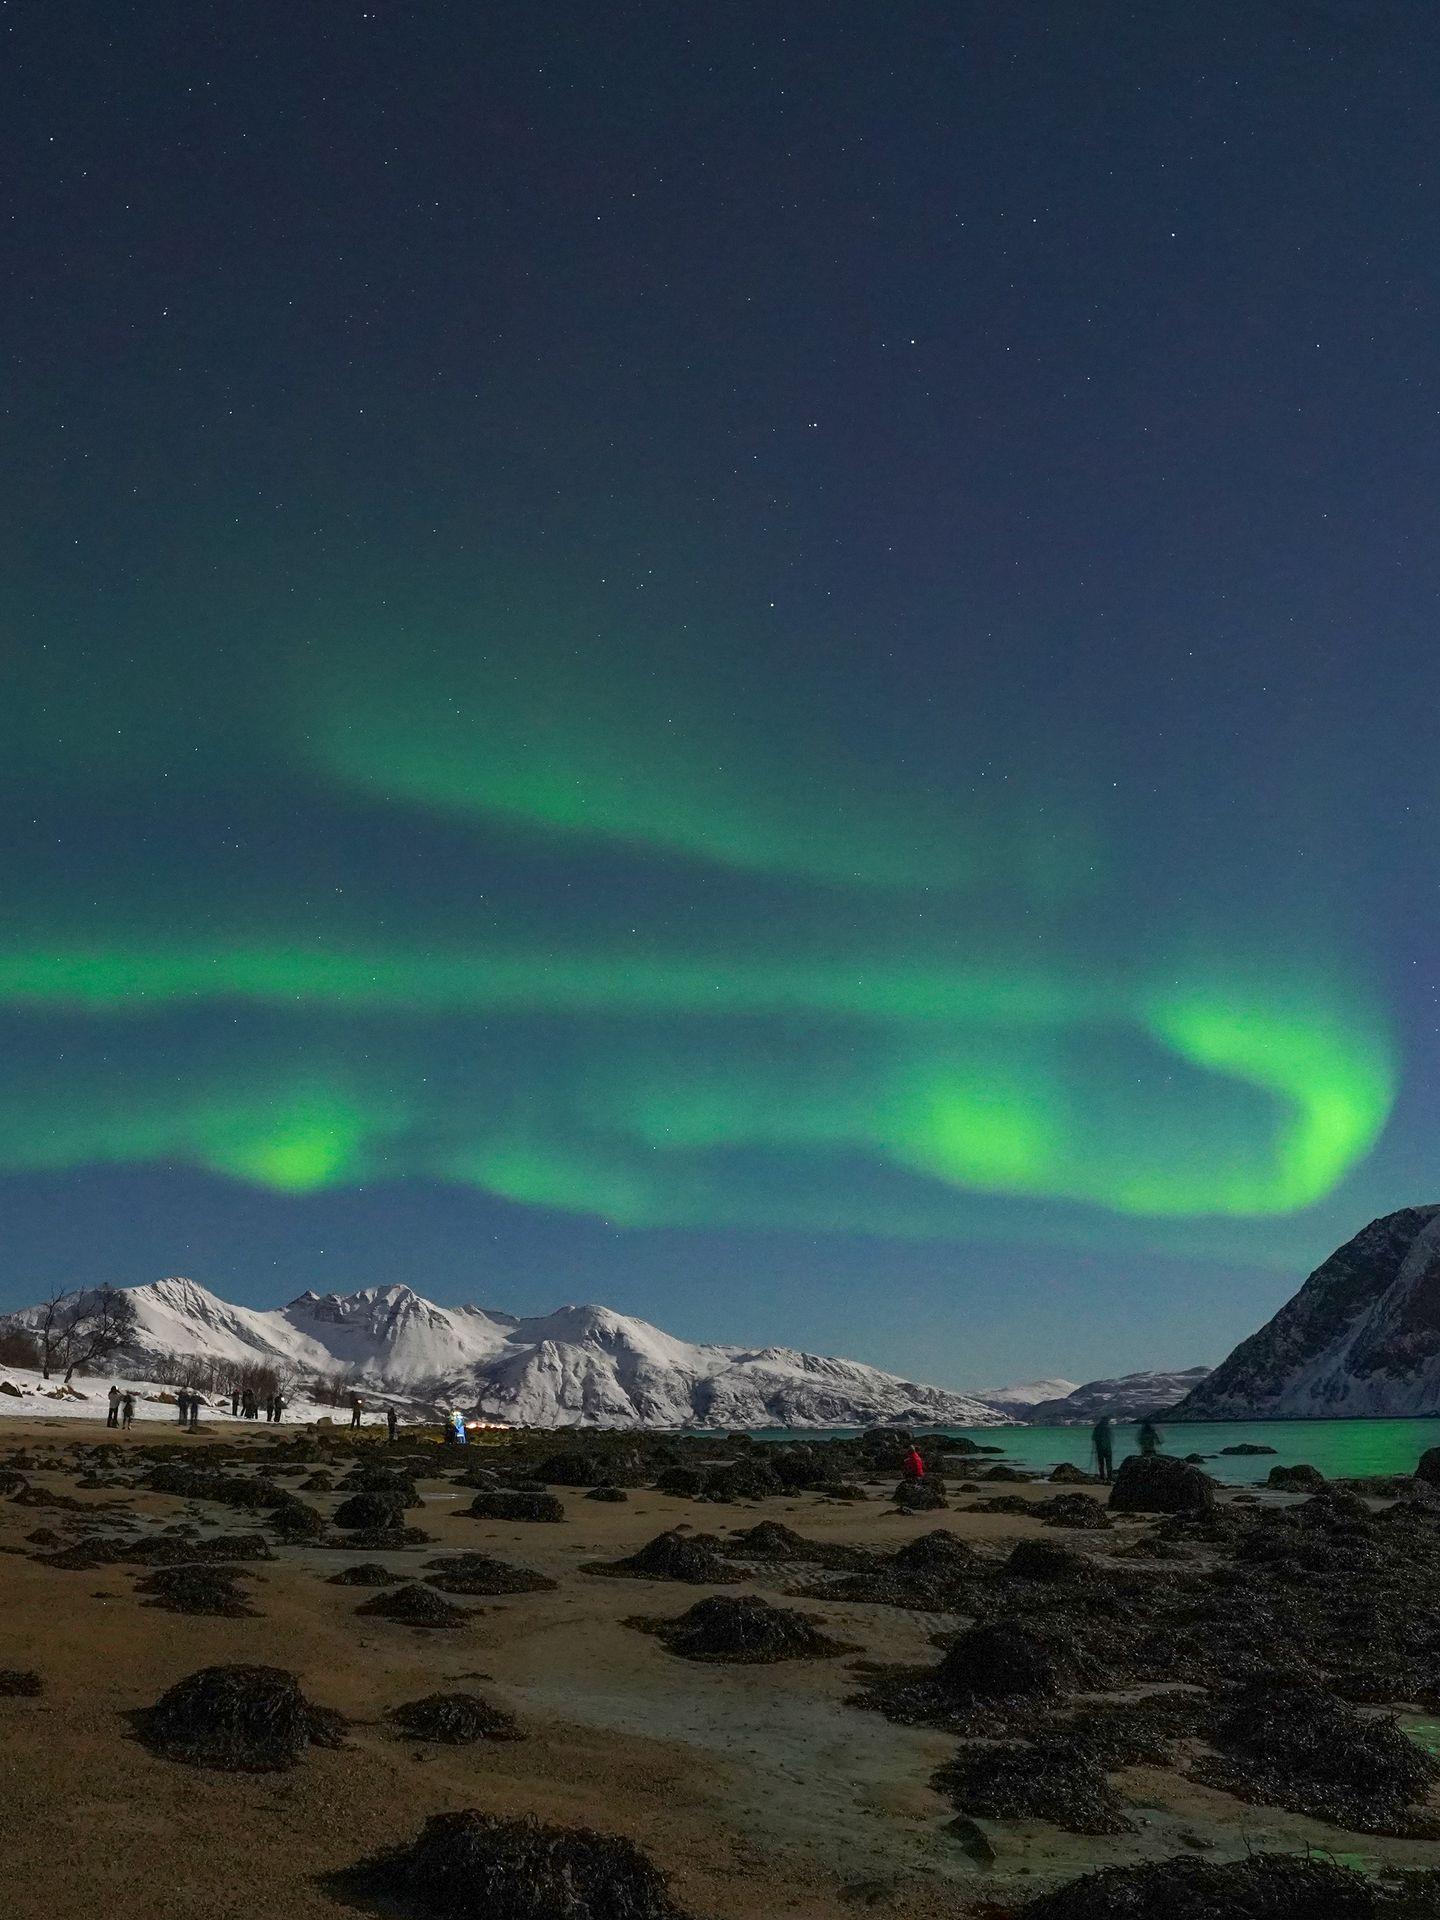 Aurora Borealis in the sky, with snow capped mountains below